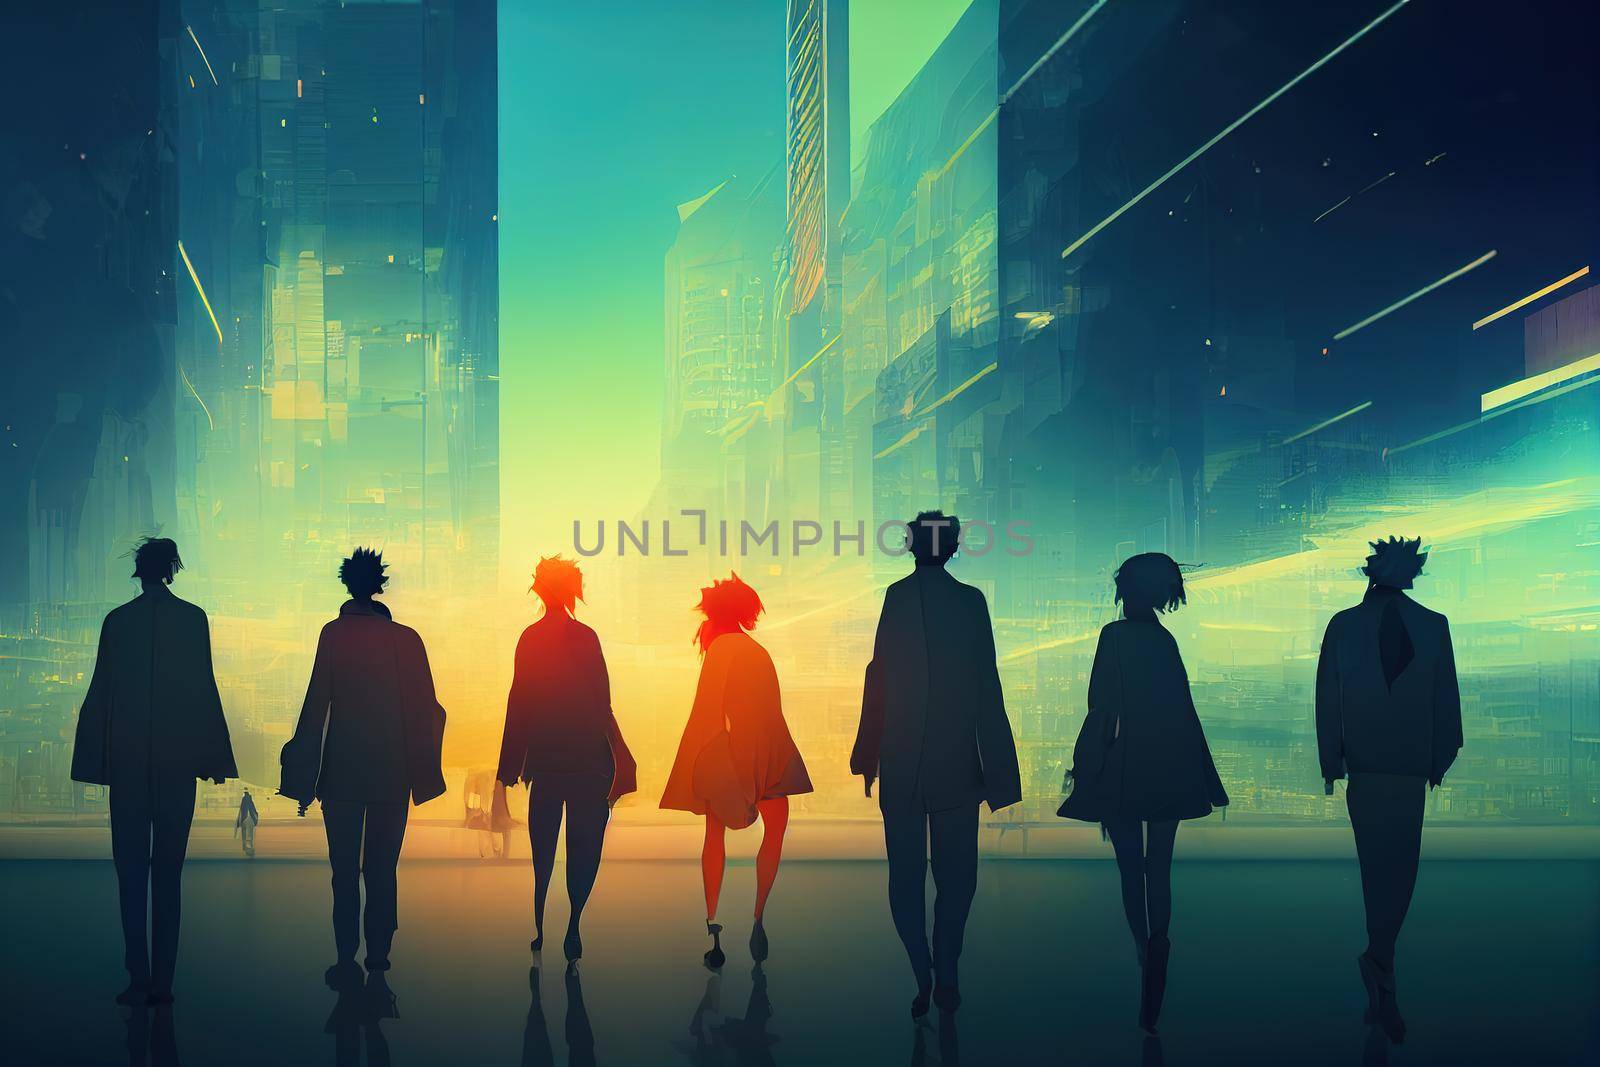 anime style, Silhouettes of walking people Multiple exposure blurred image Business concept illustration , Anime style U1 1 by 2ragon